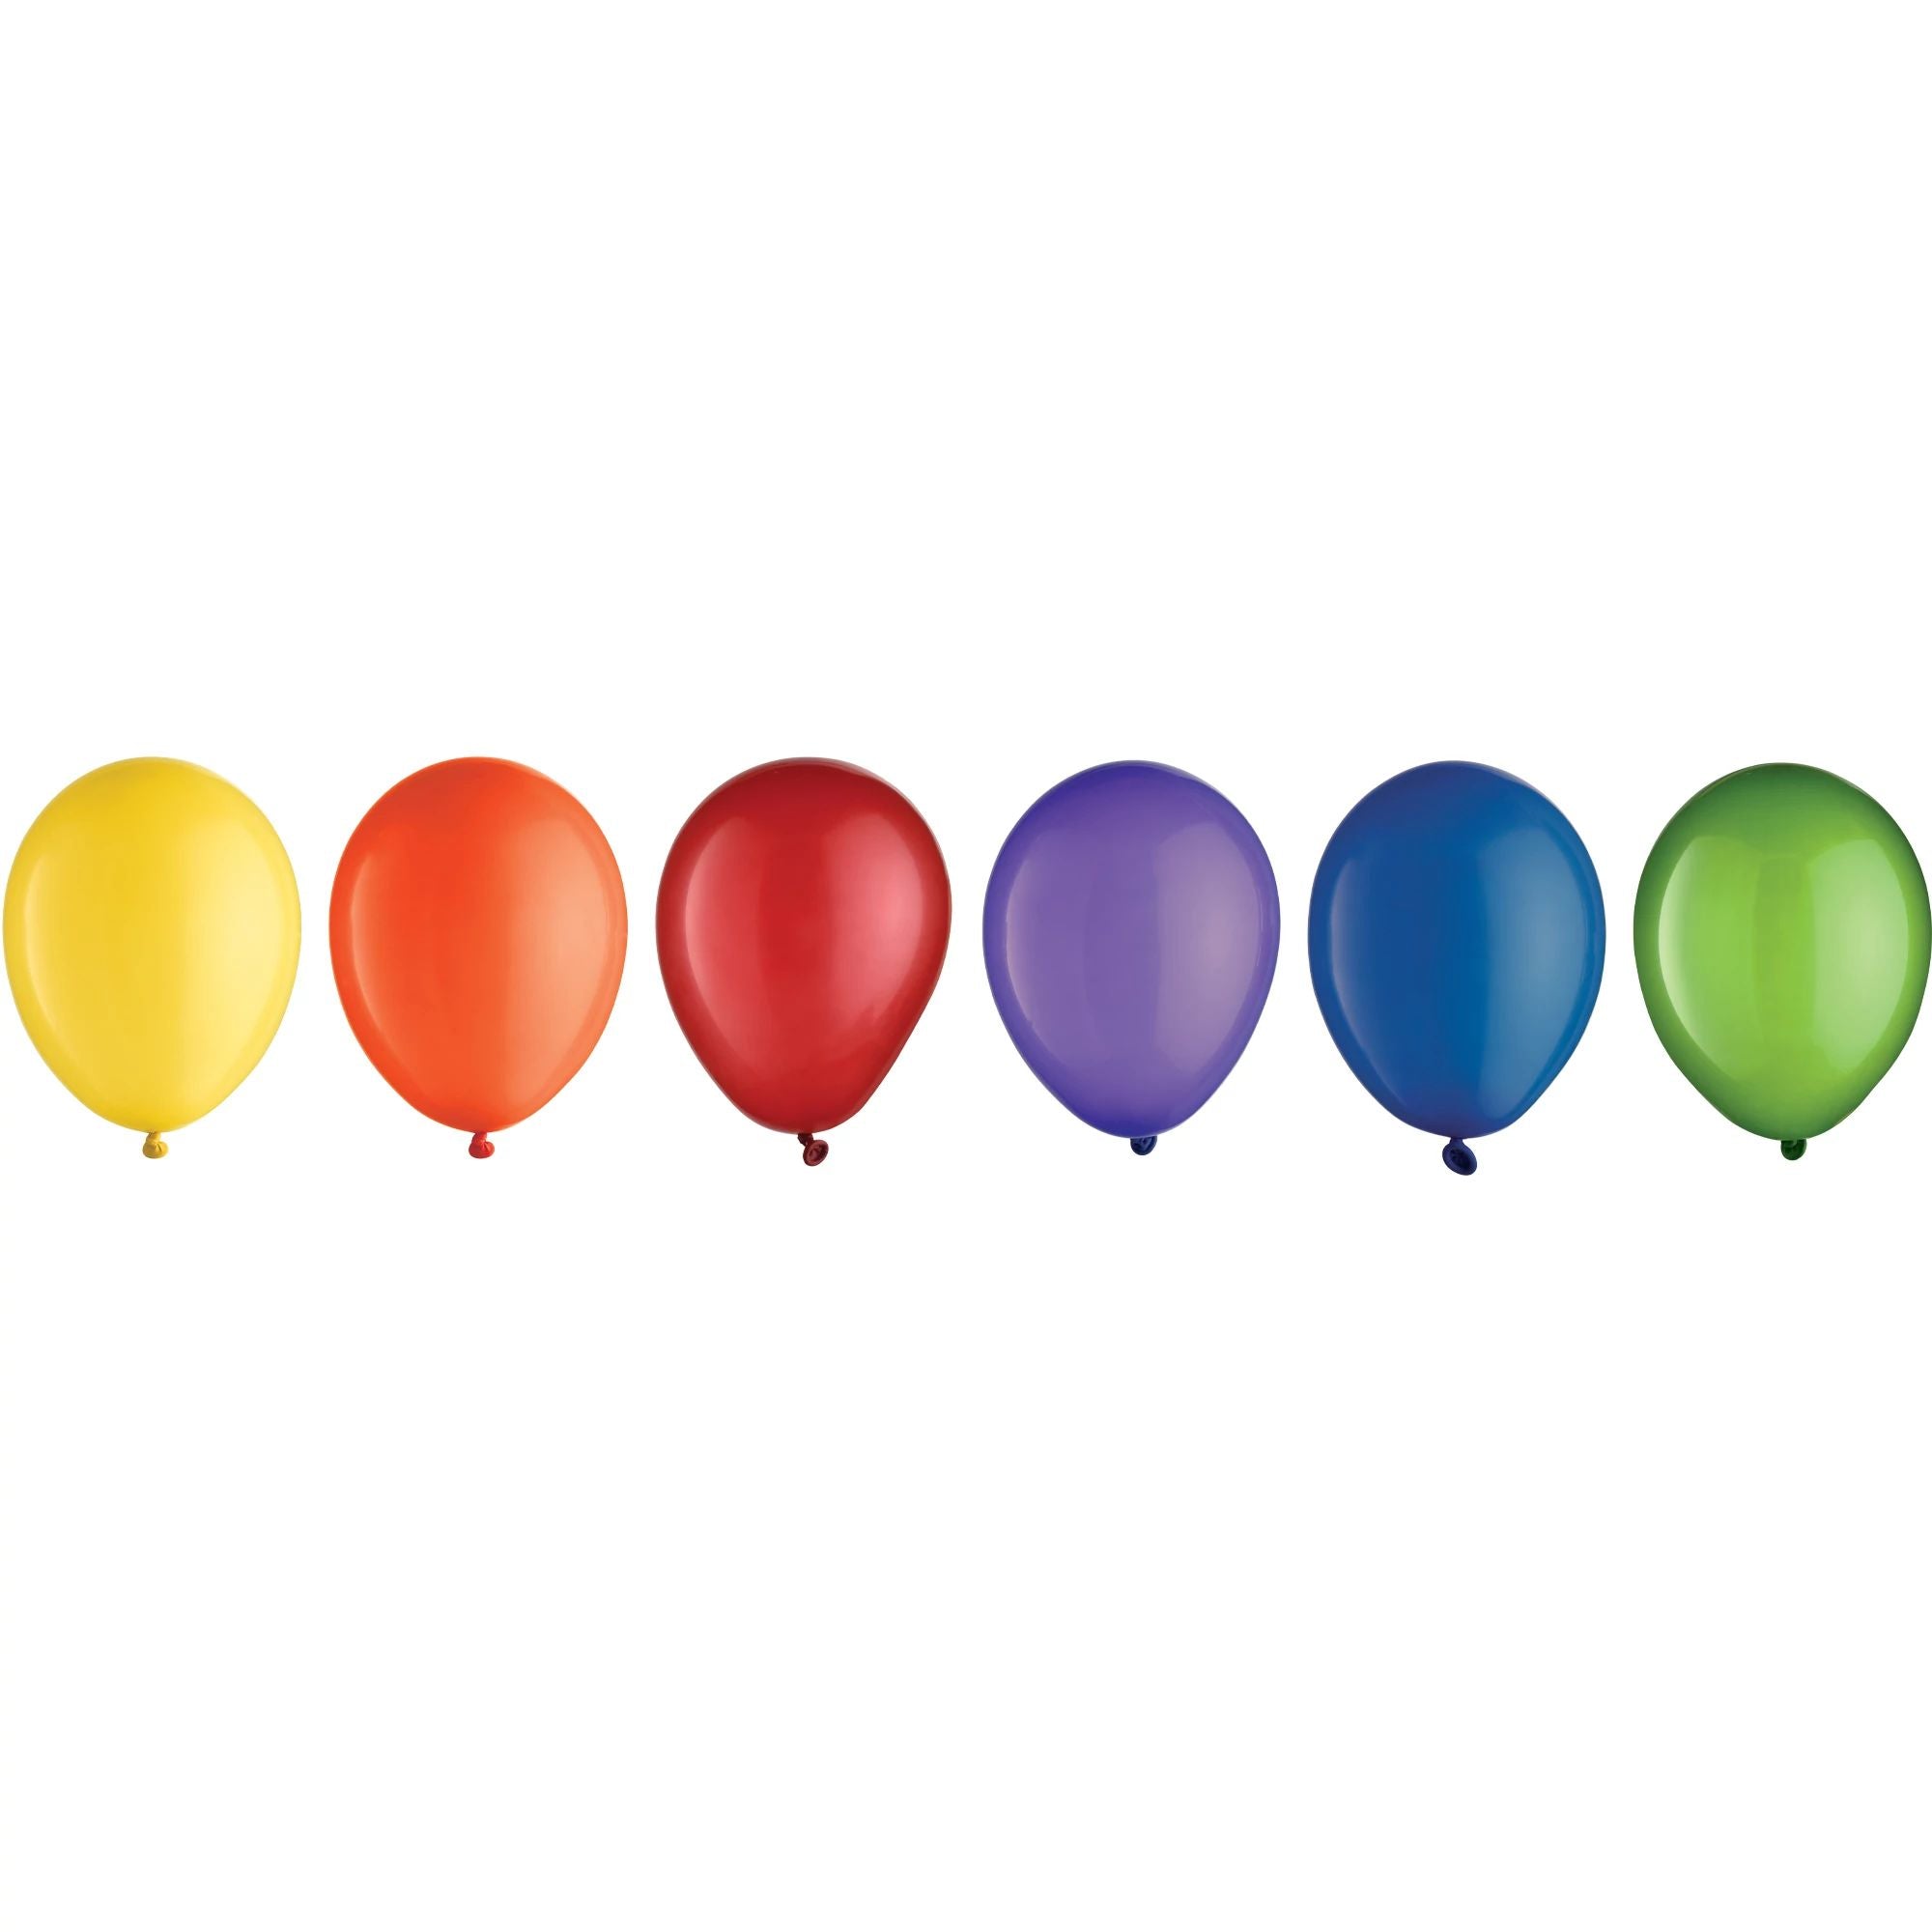 Amscan BALLOONS Assorted Solid Color Latex Balloons